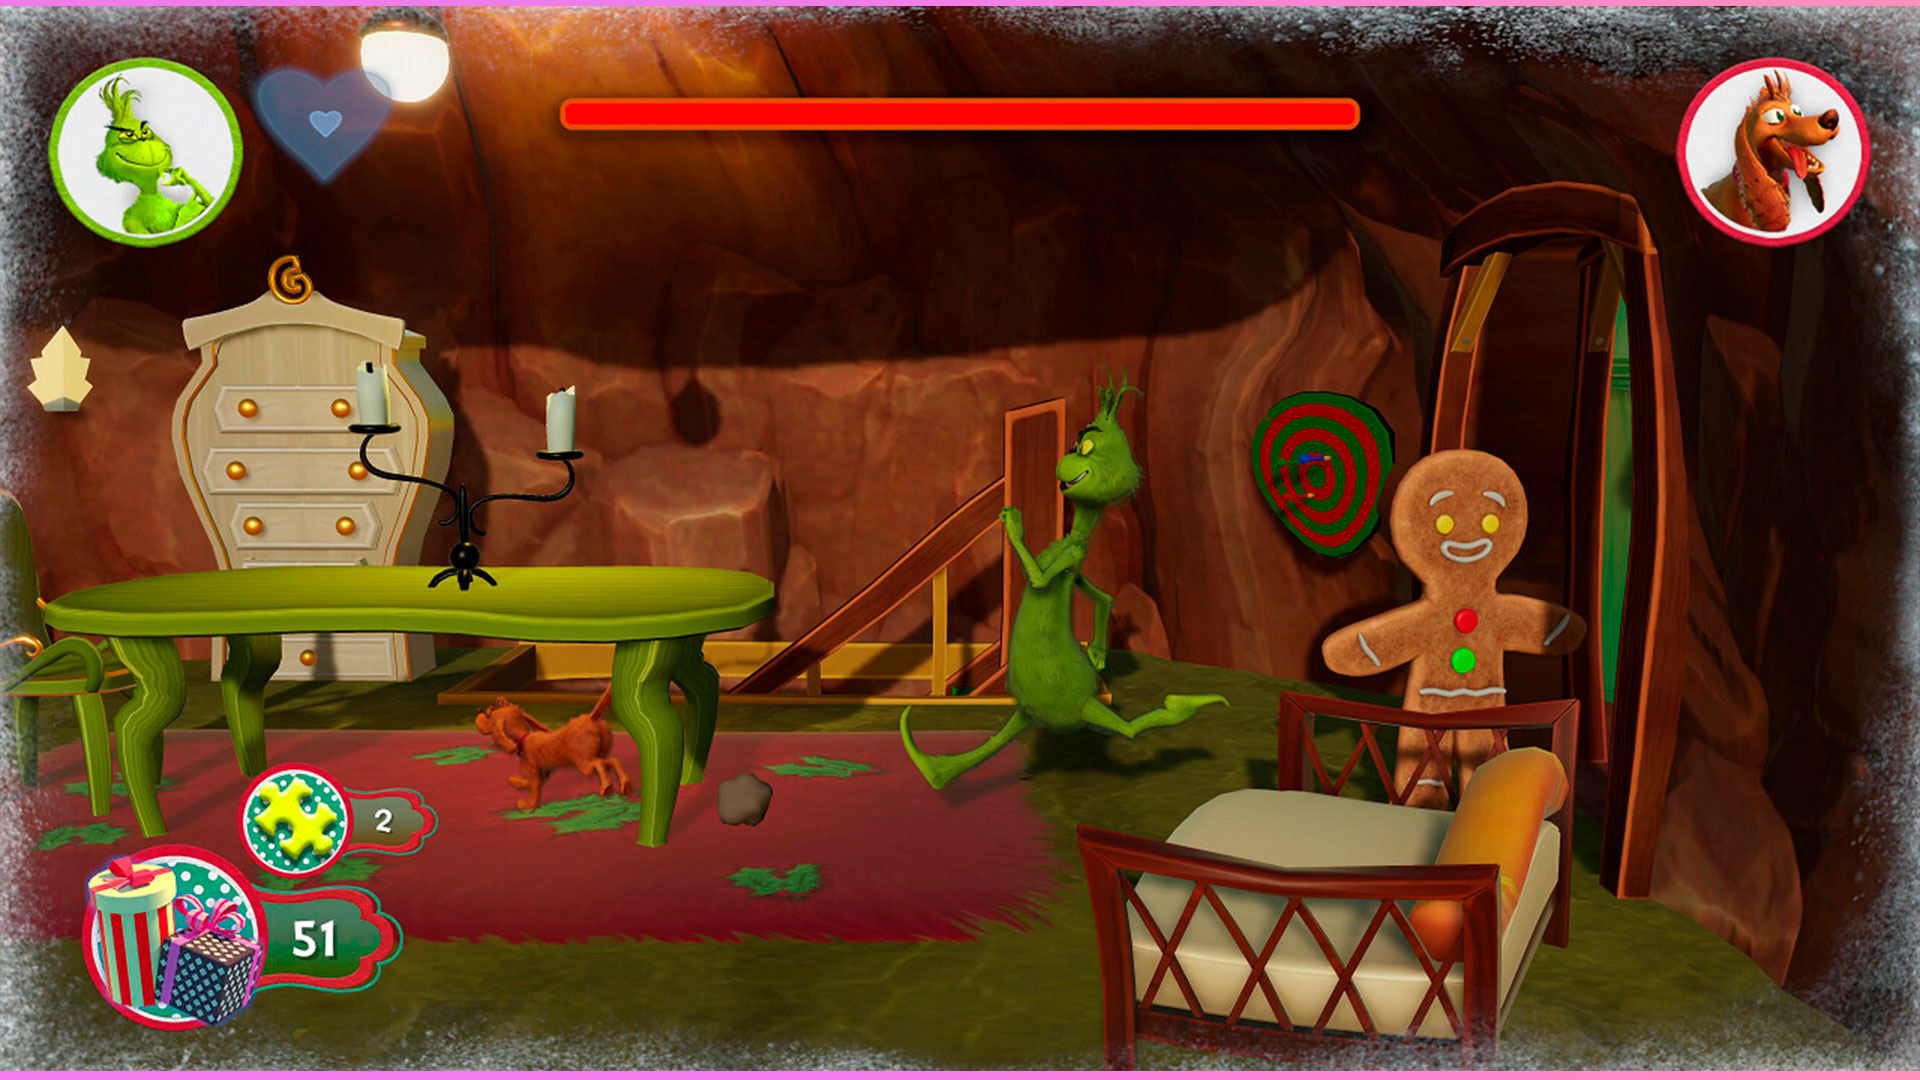 The Grinch Christmas Adventures game-screenshot 4